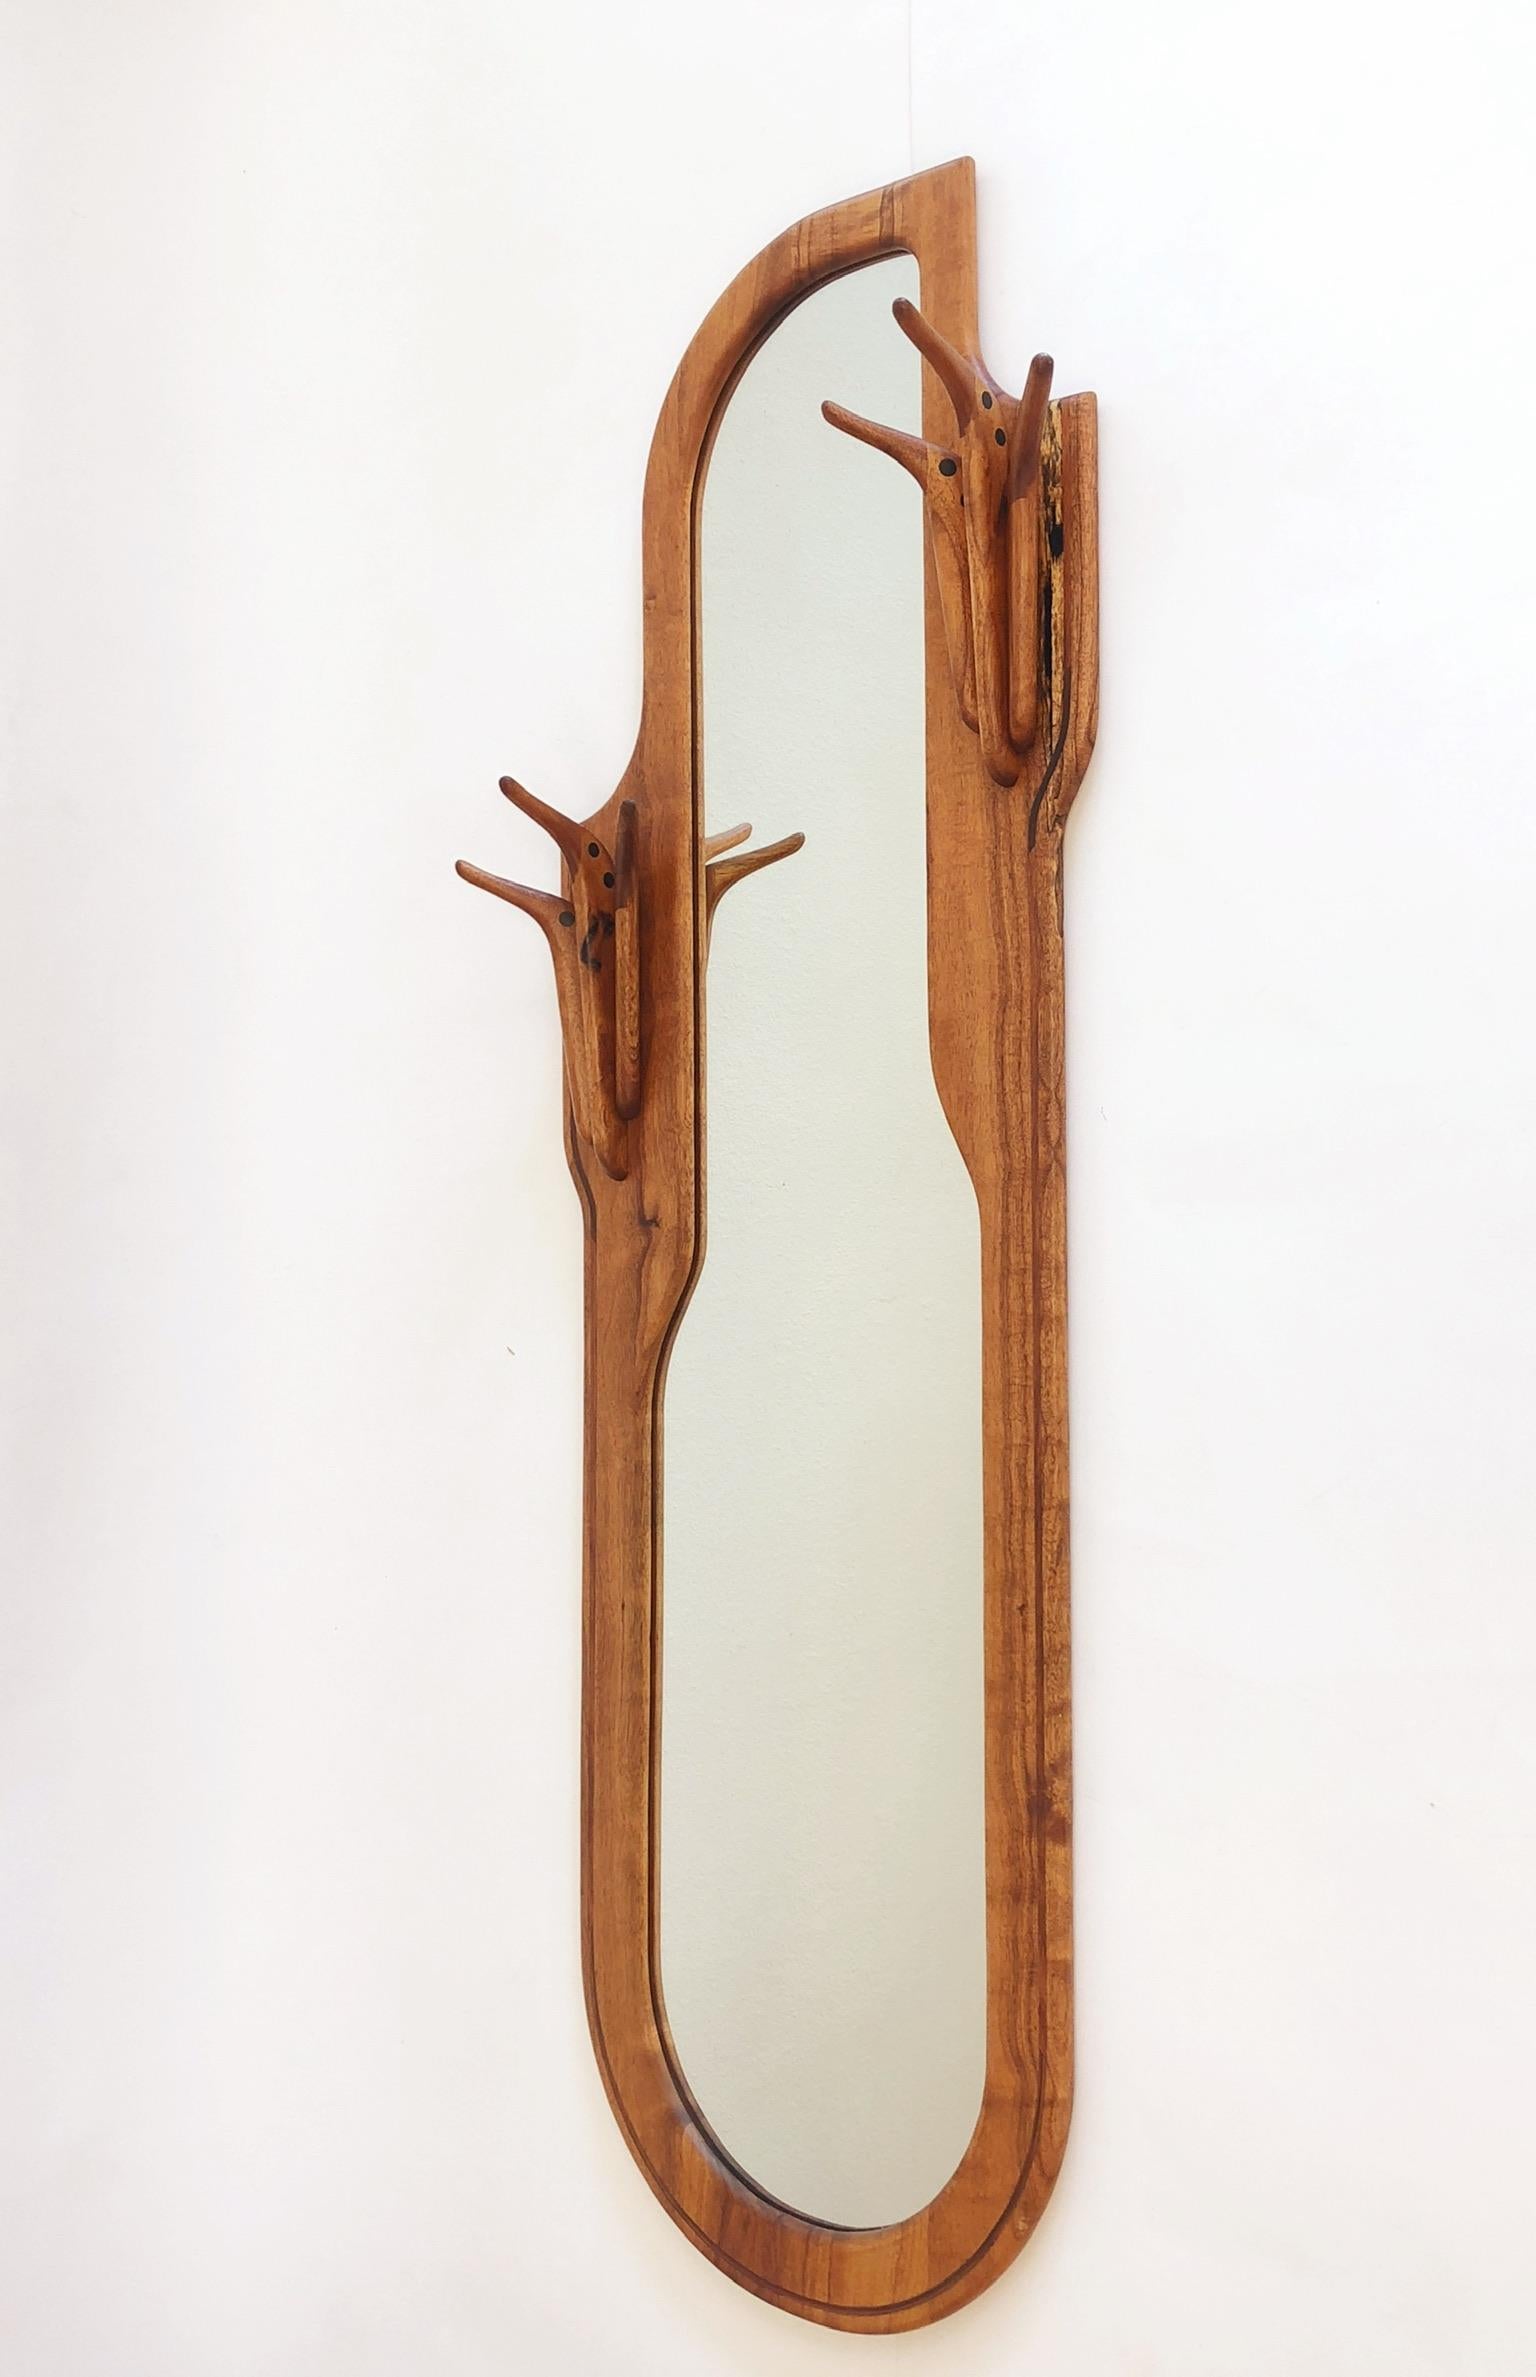 A spectacular American studio craftsman walnut mirror with a built in coat hanger. The mirror is Signed Charles B. Cobb and dated 1976.
Overall dimensions: 65” high 24” wide 6.5” deep.